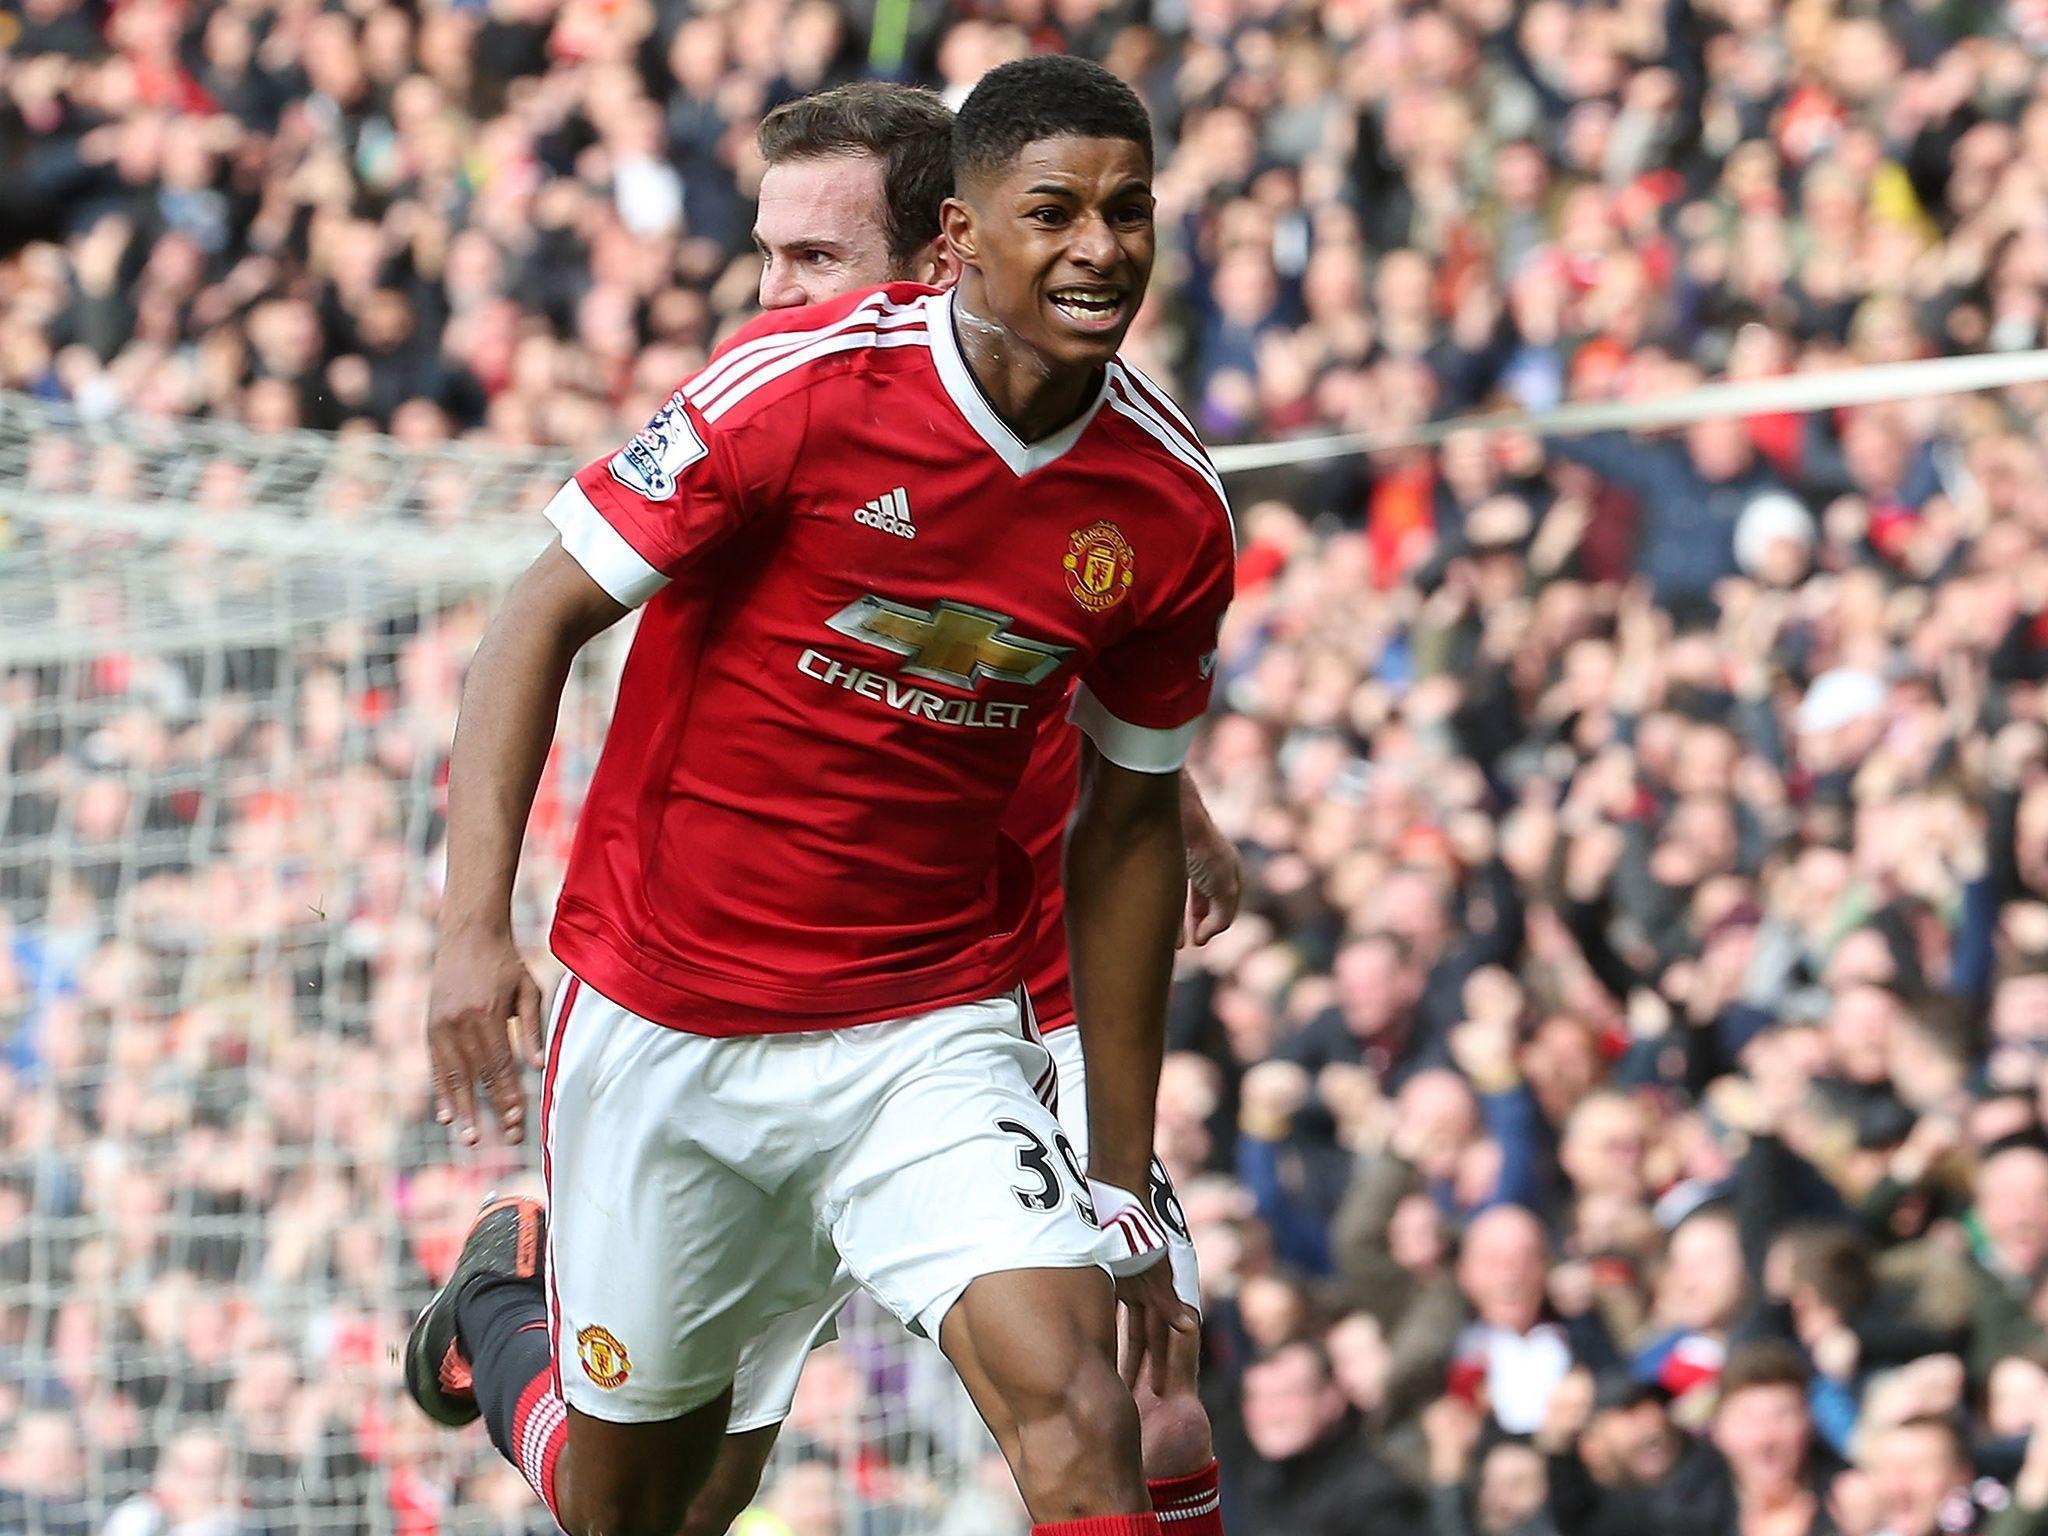 Marcus Rashford: Five things you need to know about Manchester